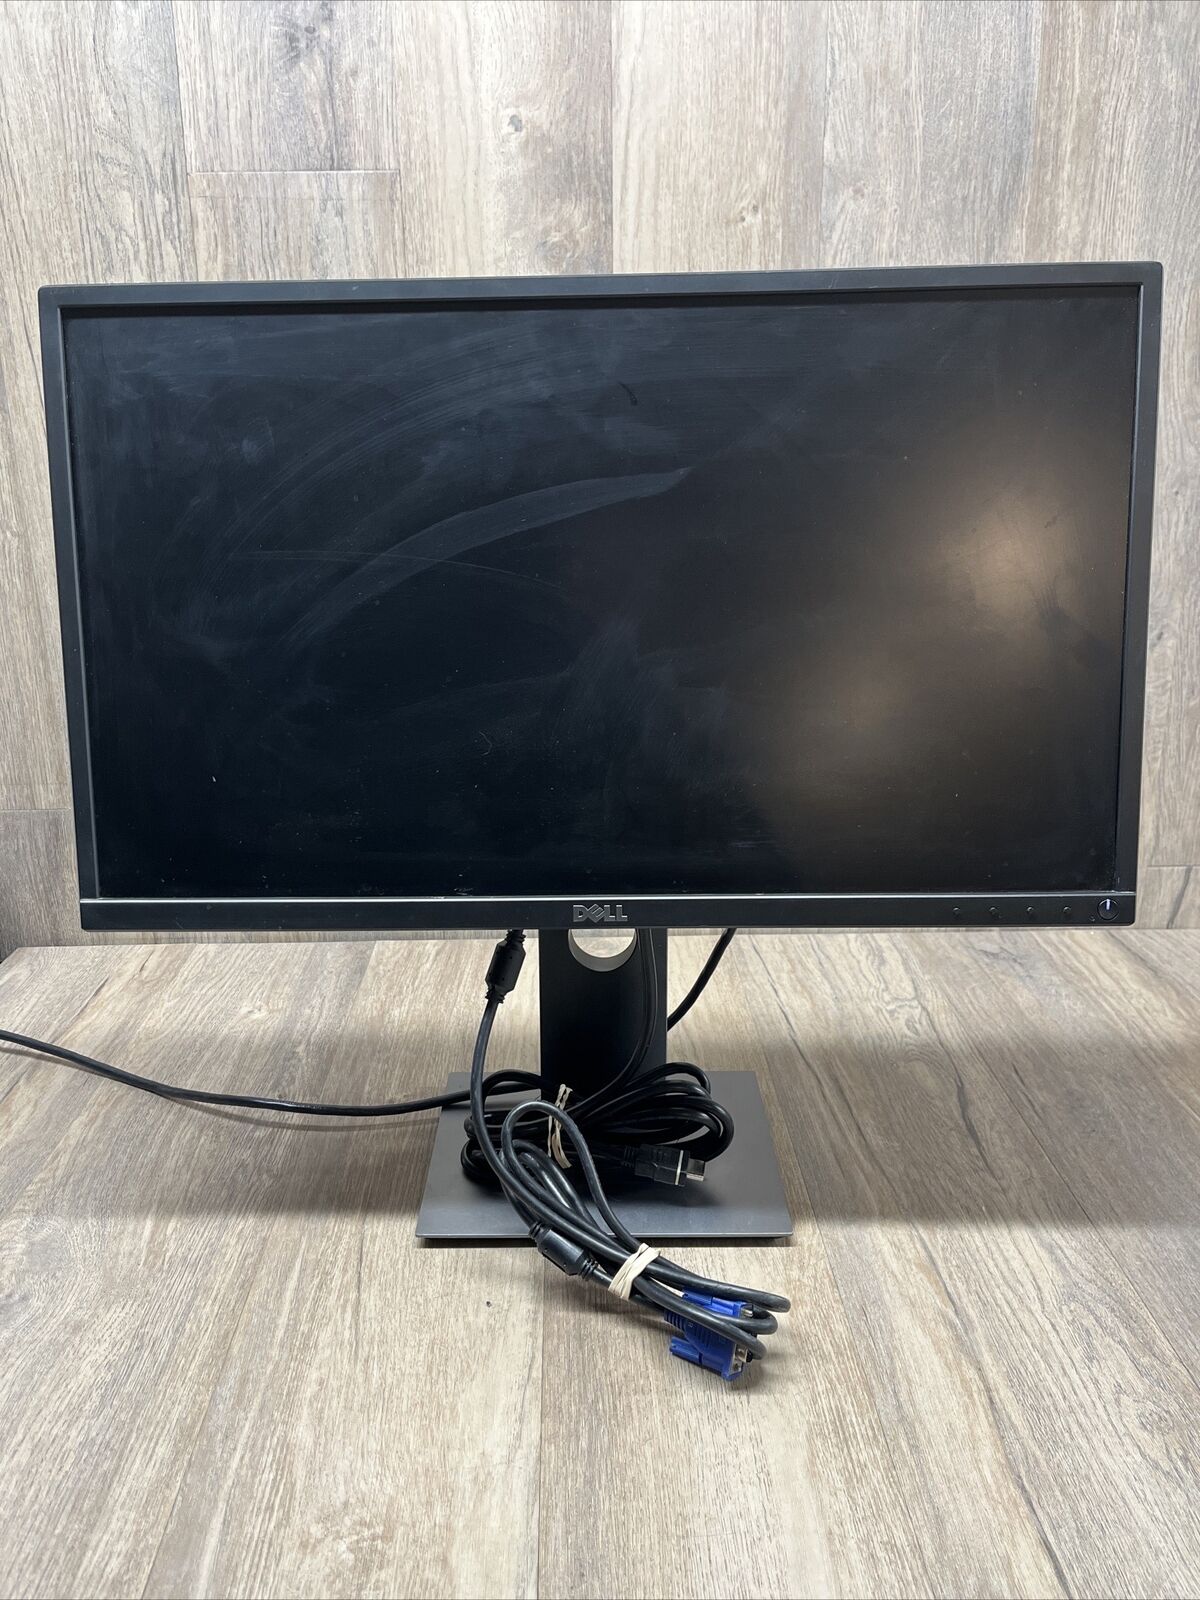 DELL P2317H 23 INCH FLAT PANEL MONITOR